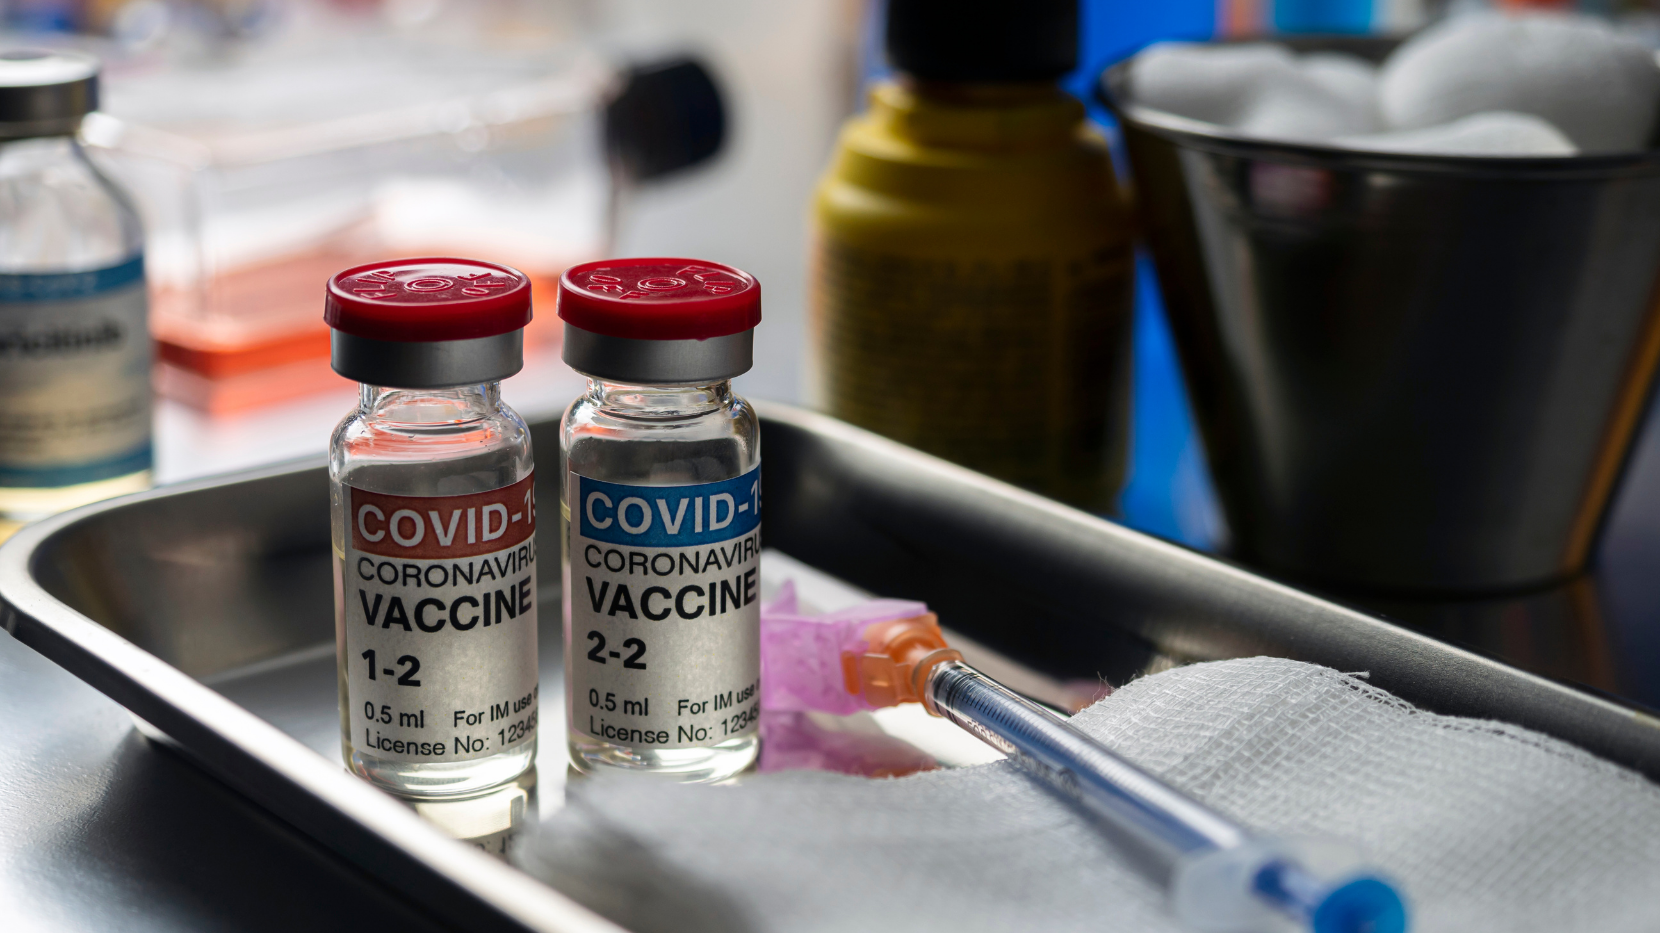 Two COVID-19 Vaccines